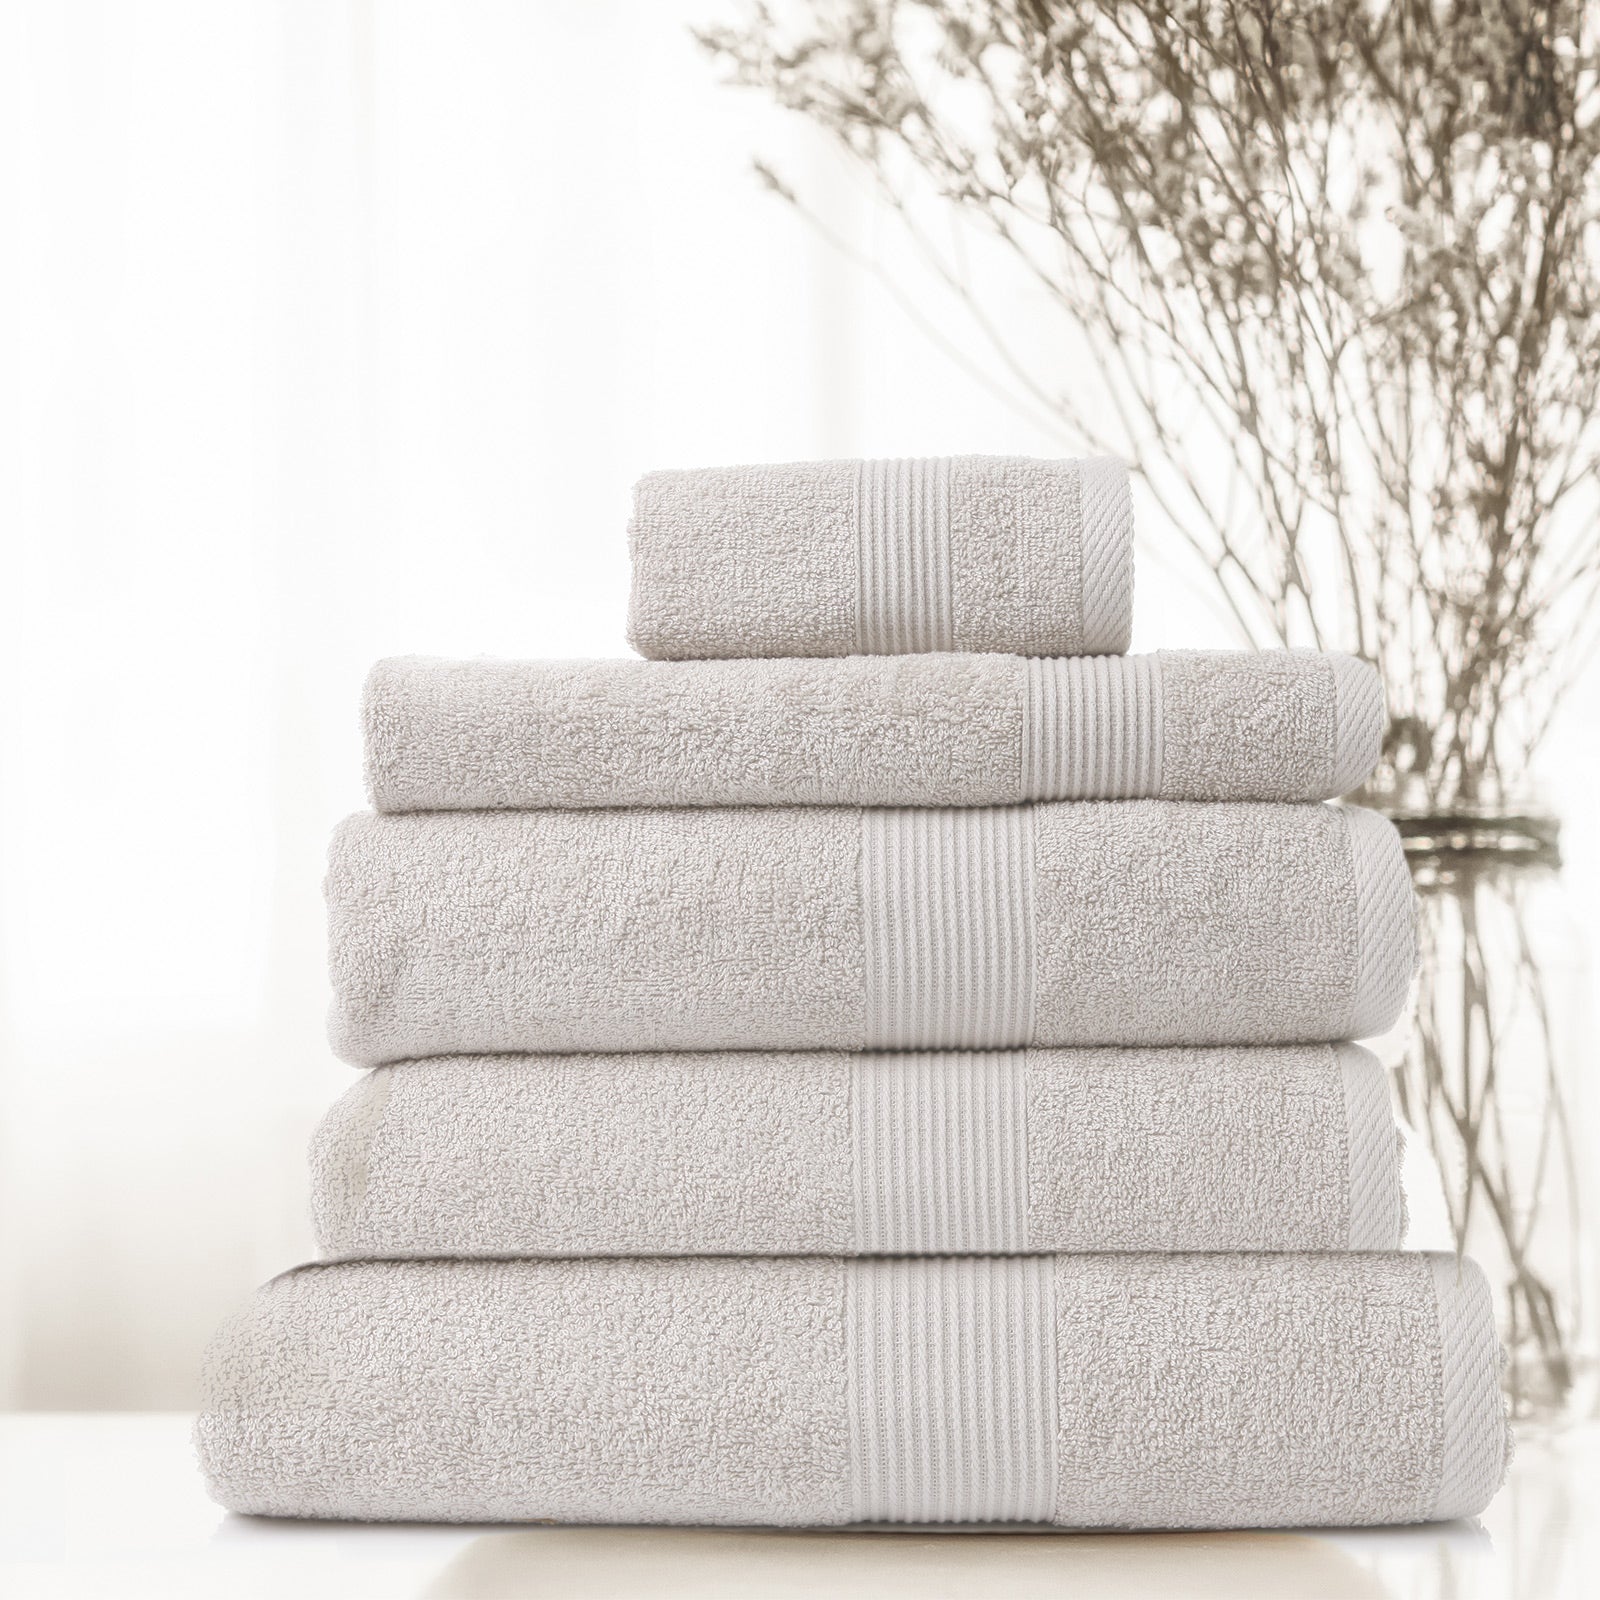 Royal Comfort Cotton Bamboo Towel 5pc Set - Seaholly